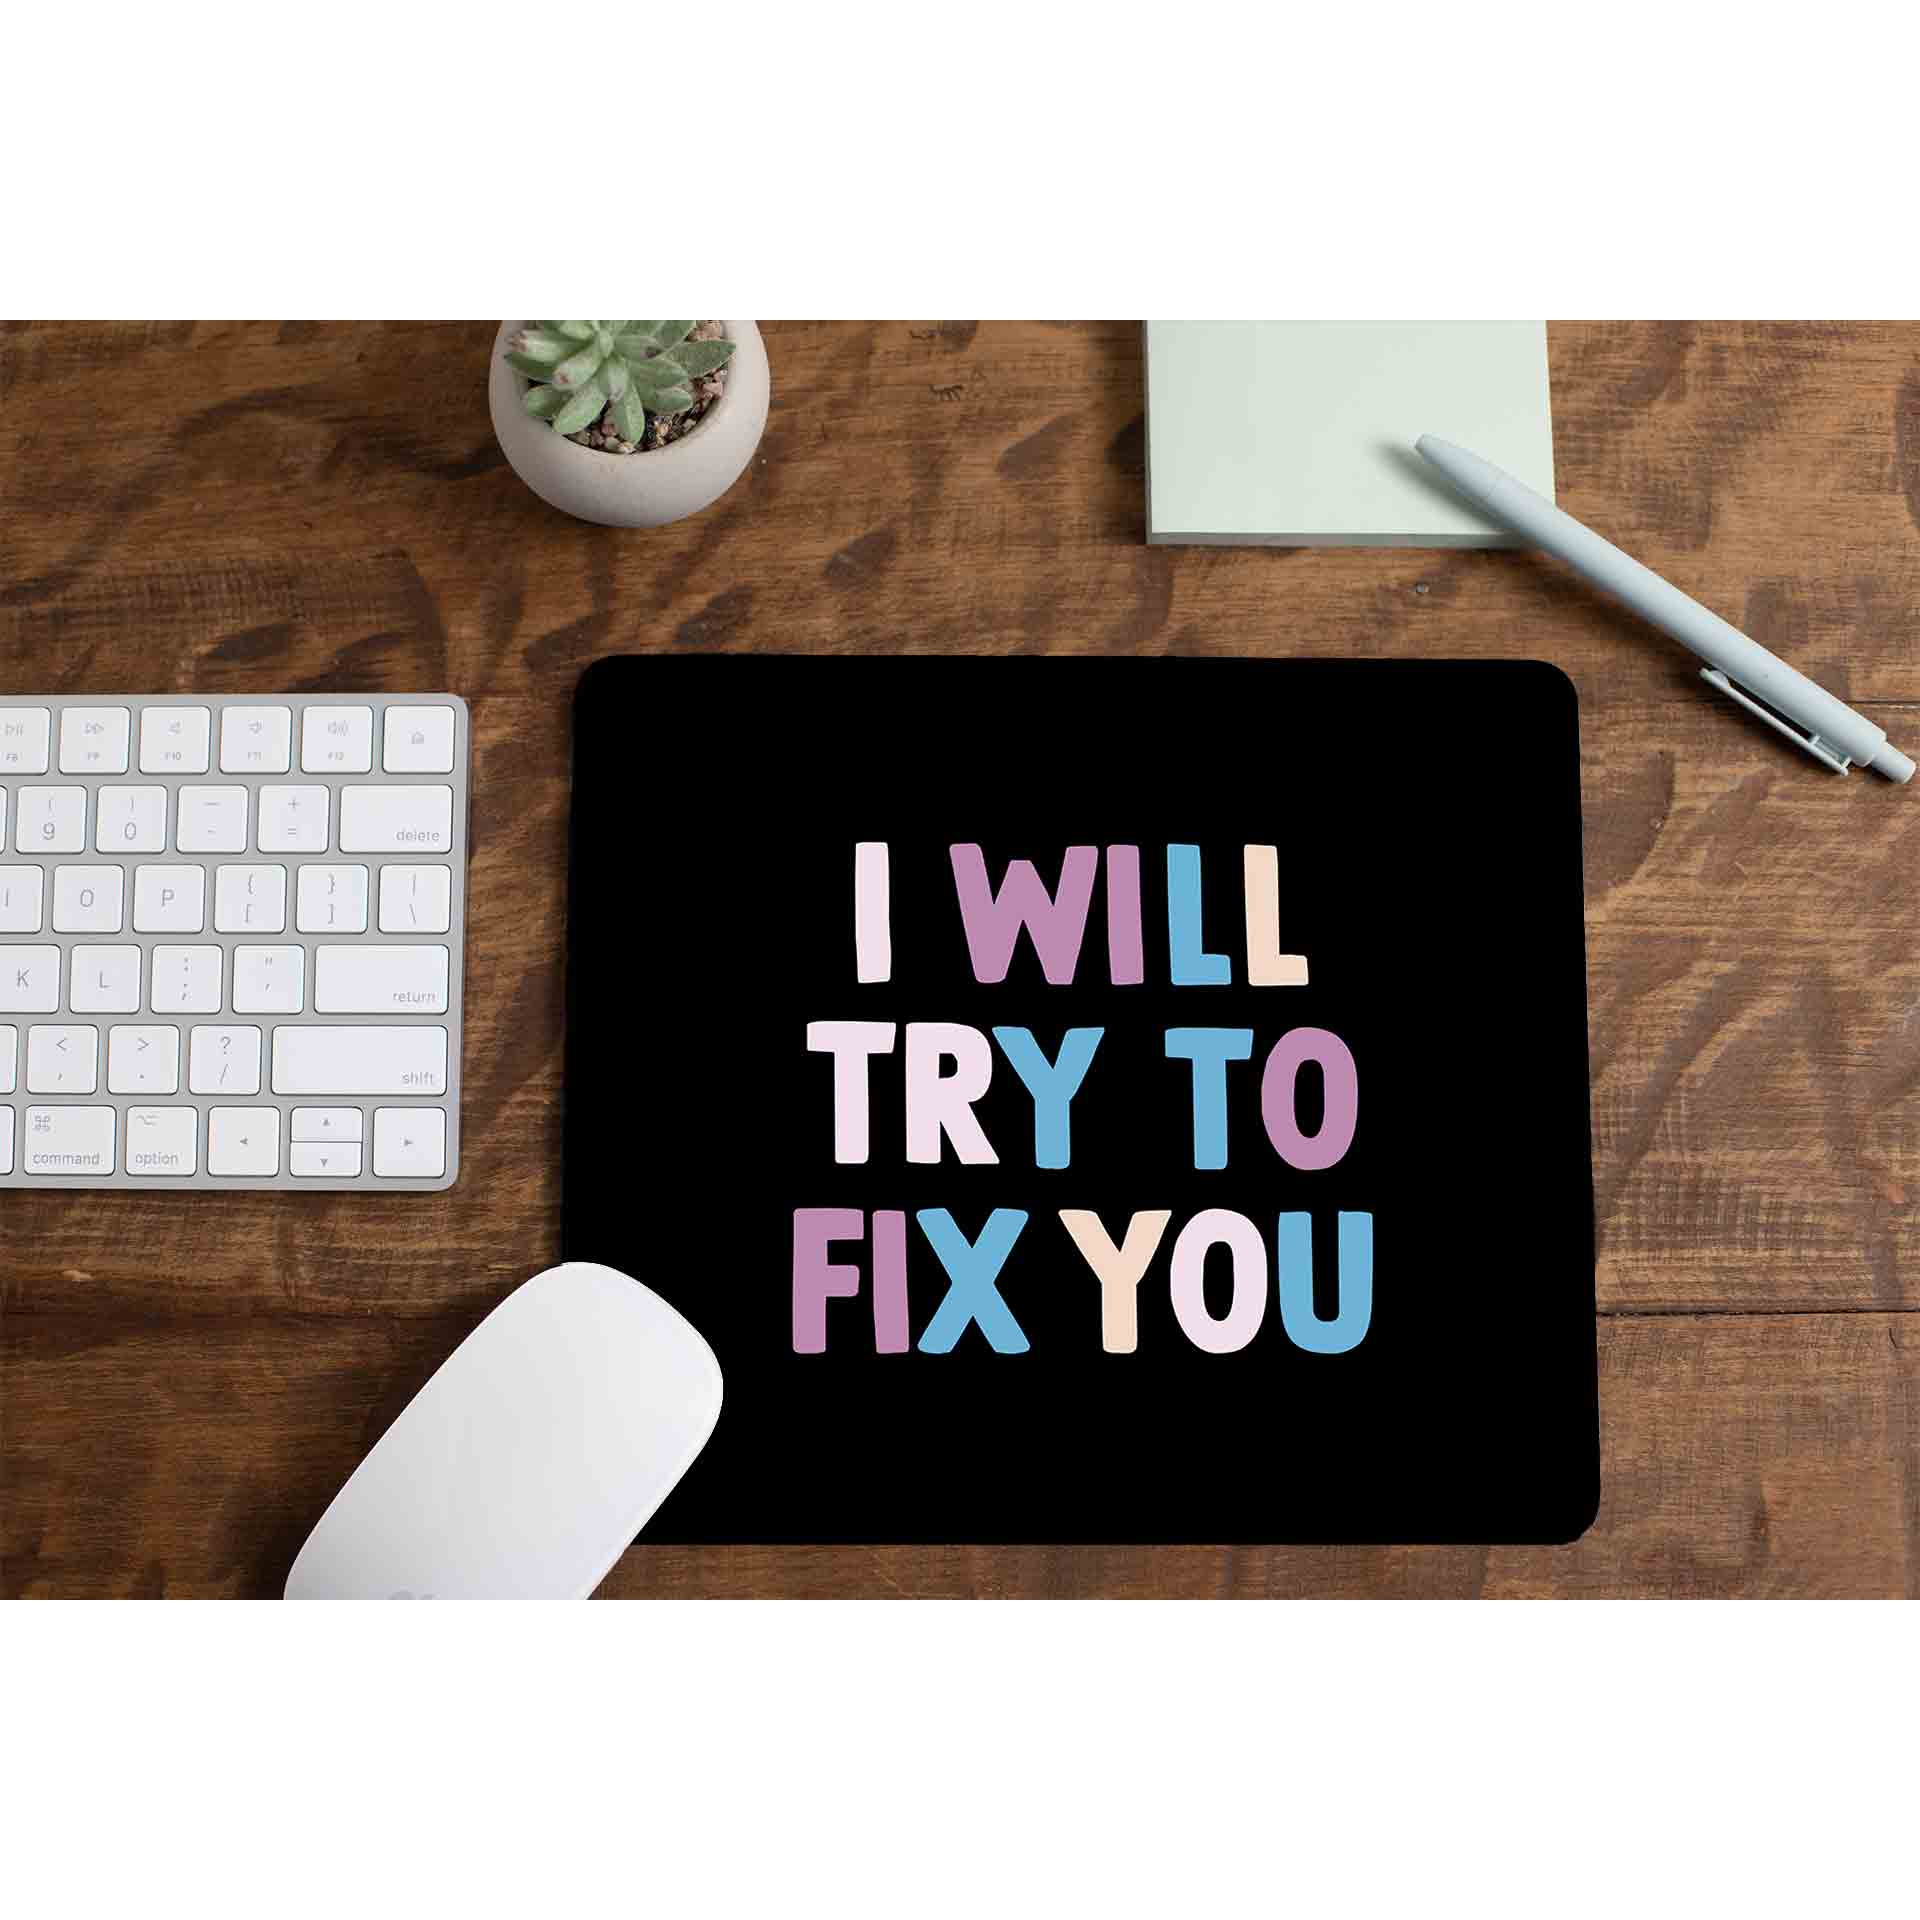 coldplay i will try to fix you mousepad logitech large anime music band buy online united states of america usa the banyan tee tbt men women girls boys unisex